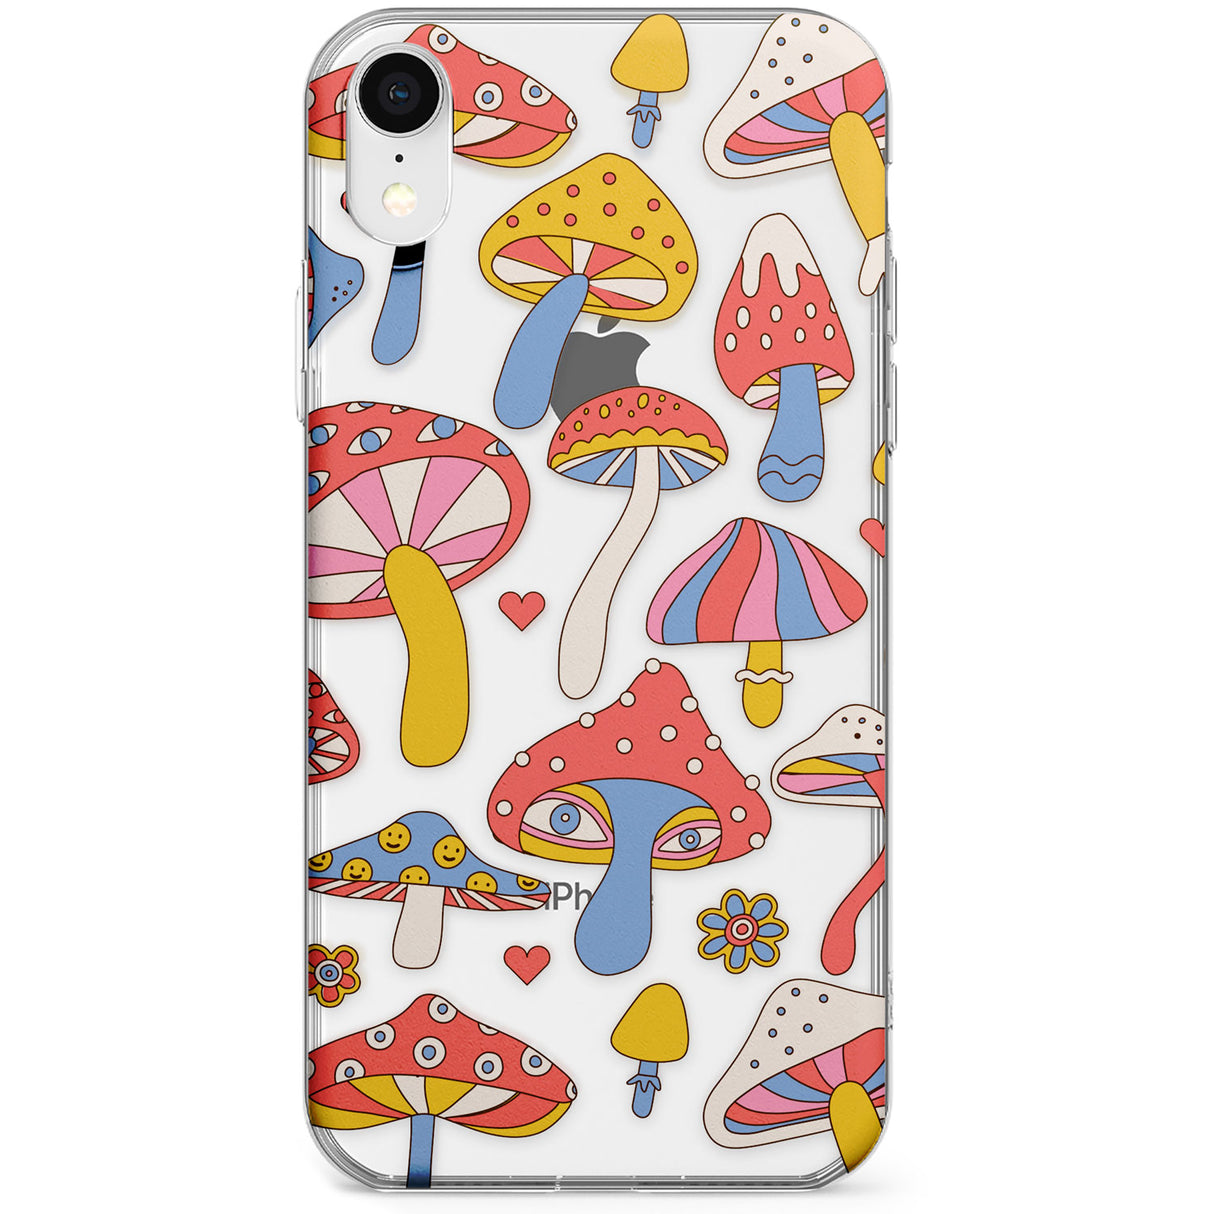 Vibrant Shrooms Phone Case for iPhone X, XS Max, XR